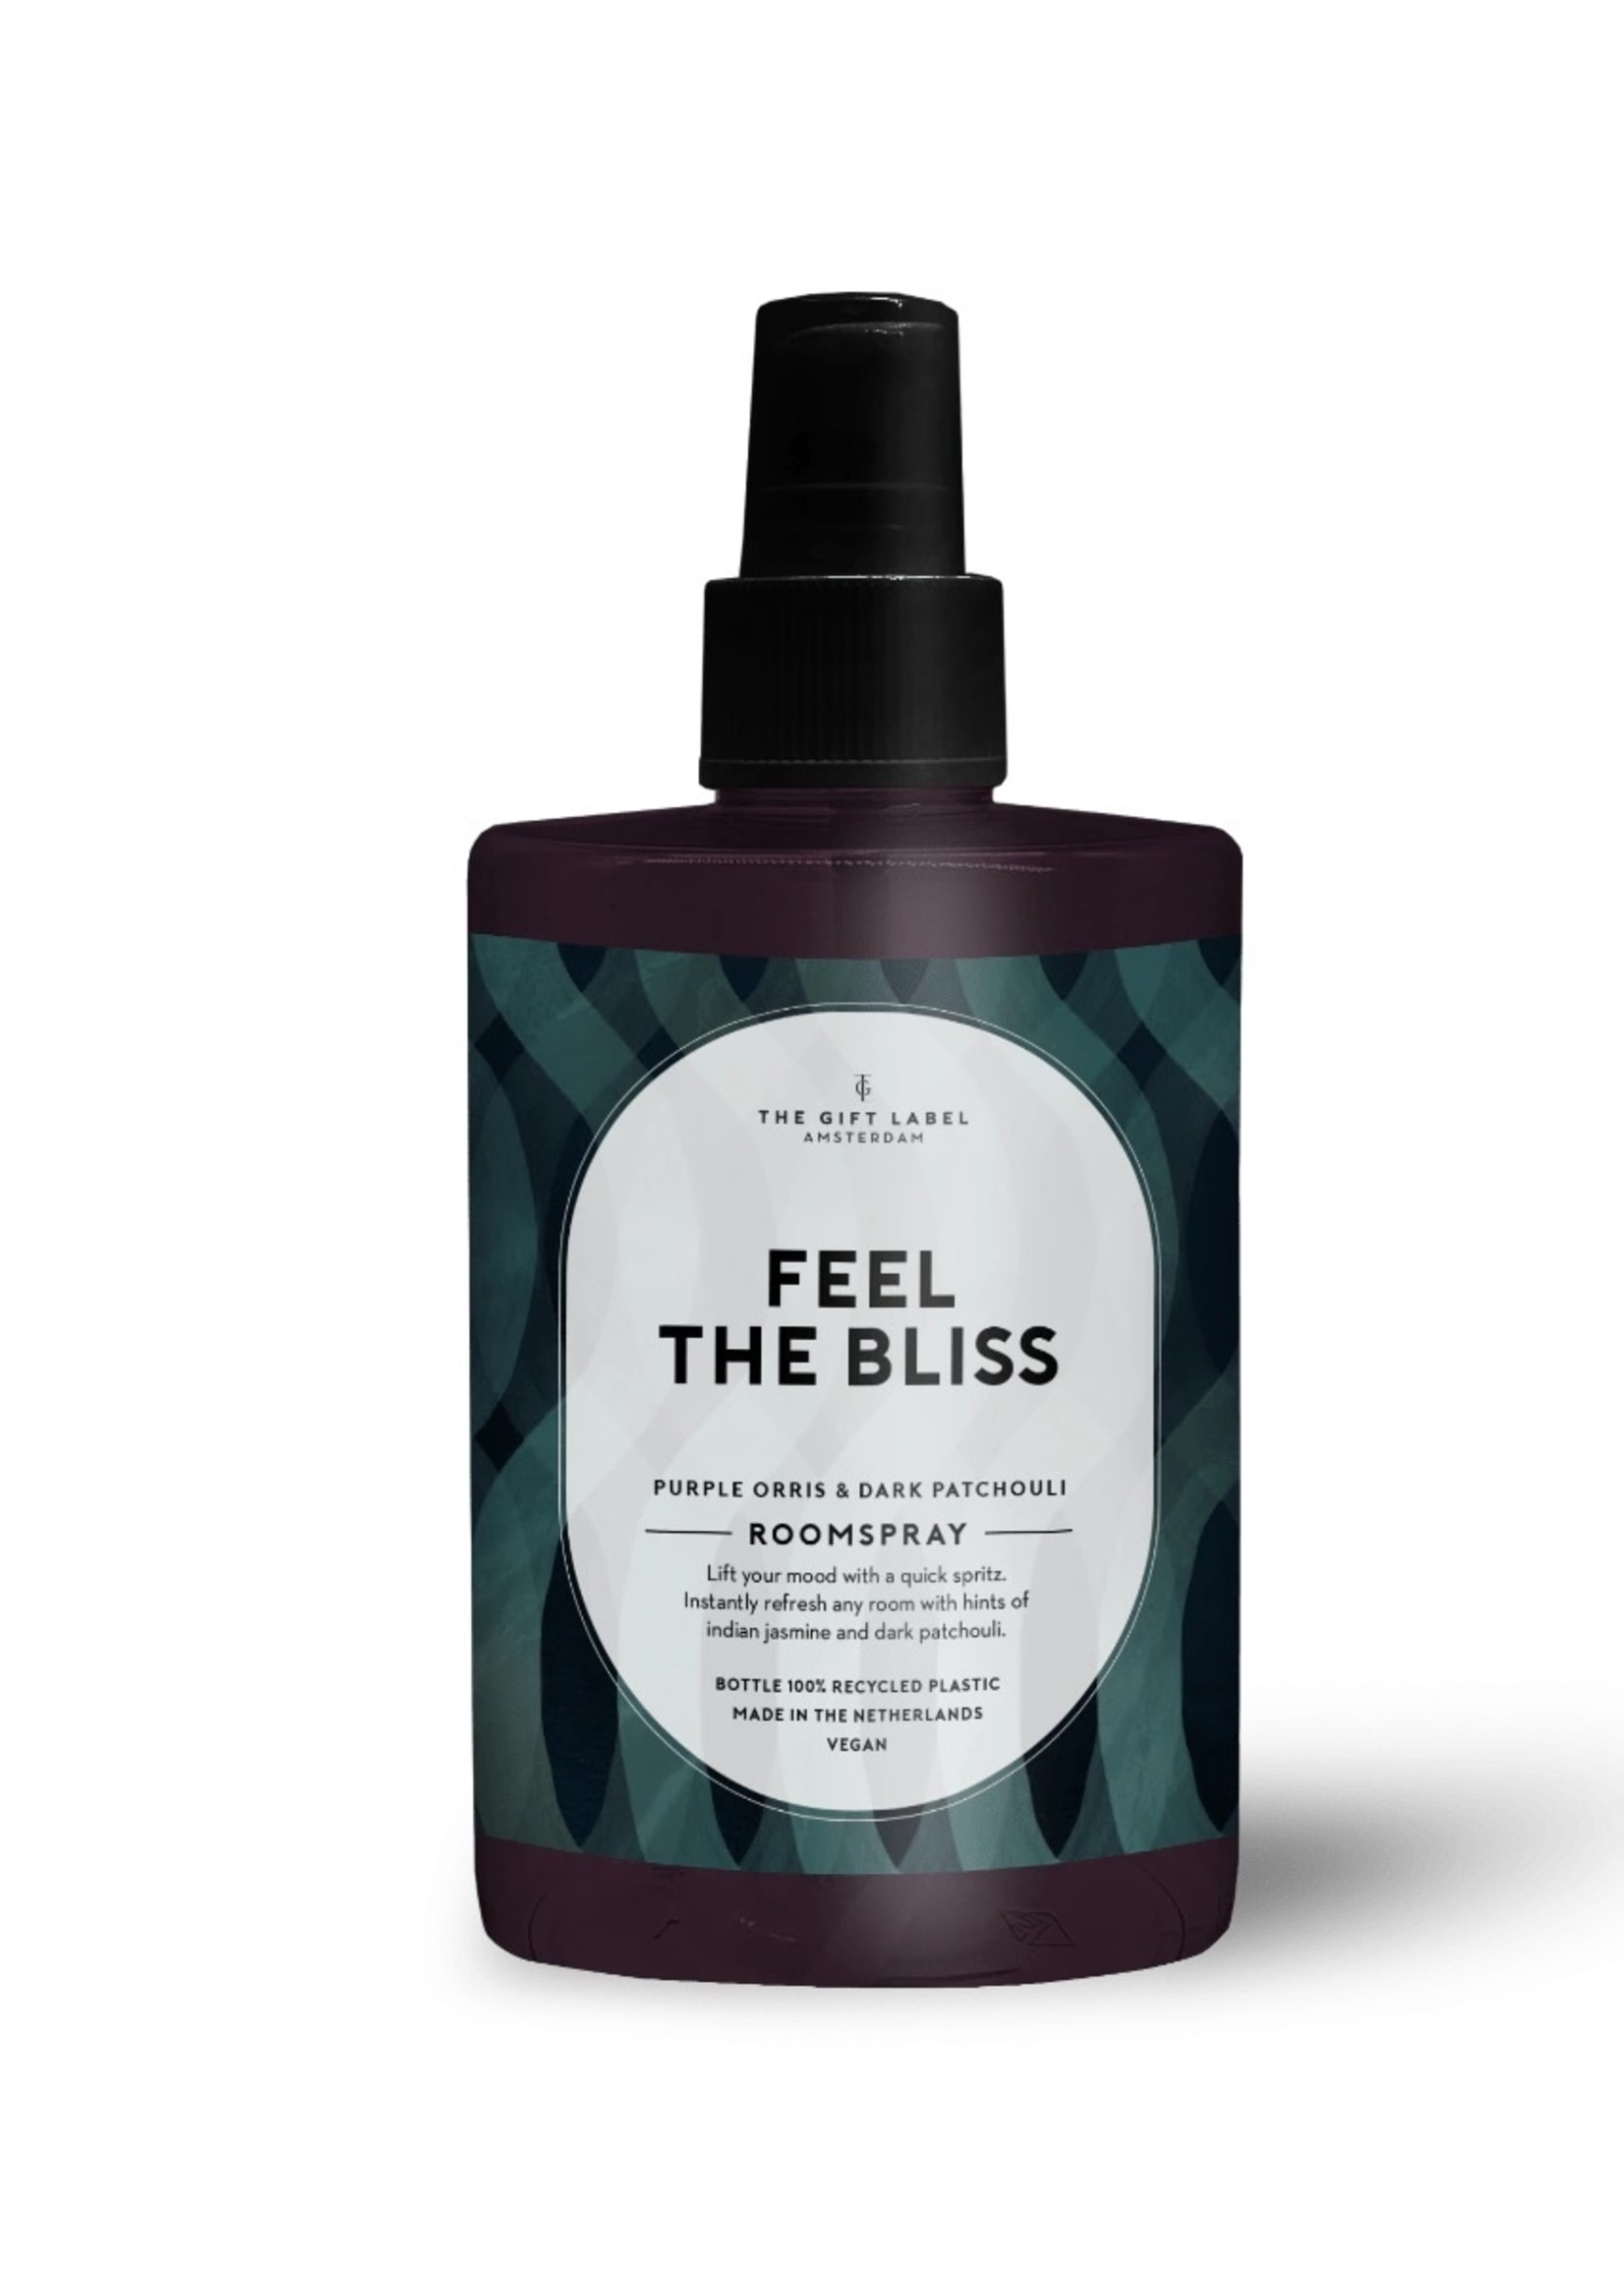 The Gift Label The Gift Label Room Spray HIW Feel the Bliss FW22